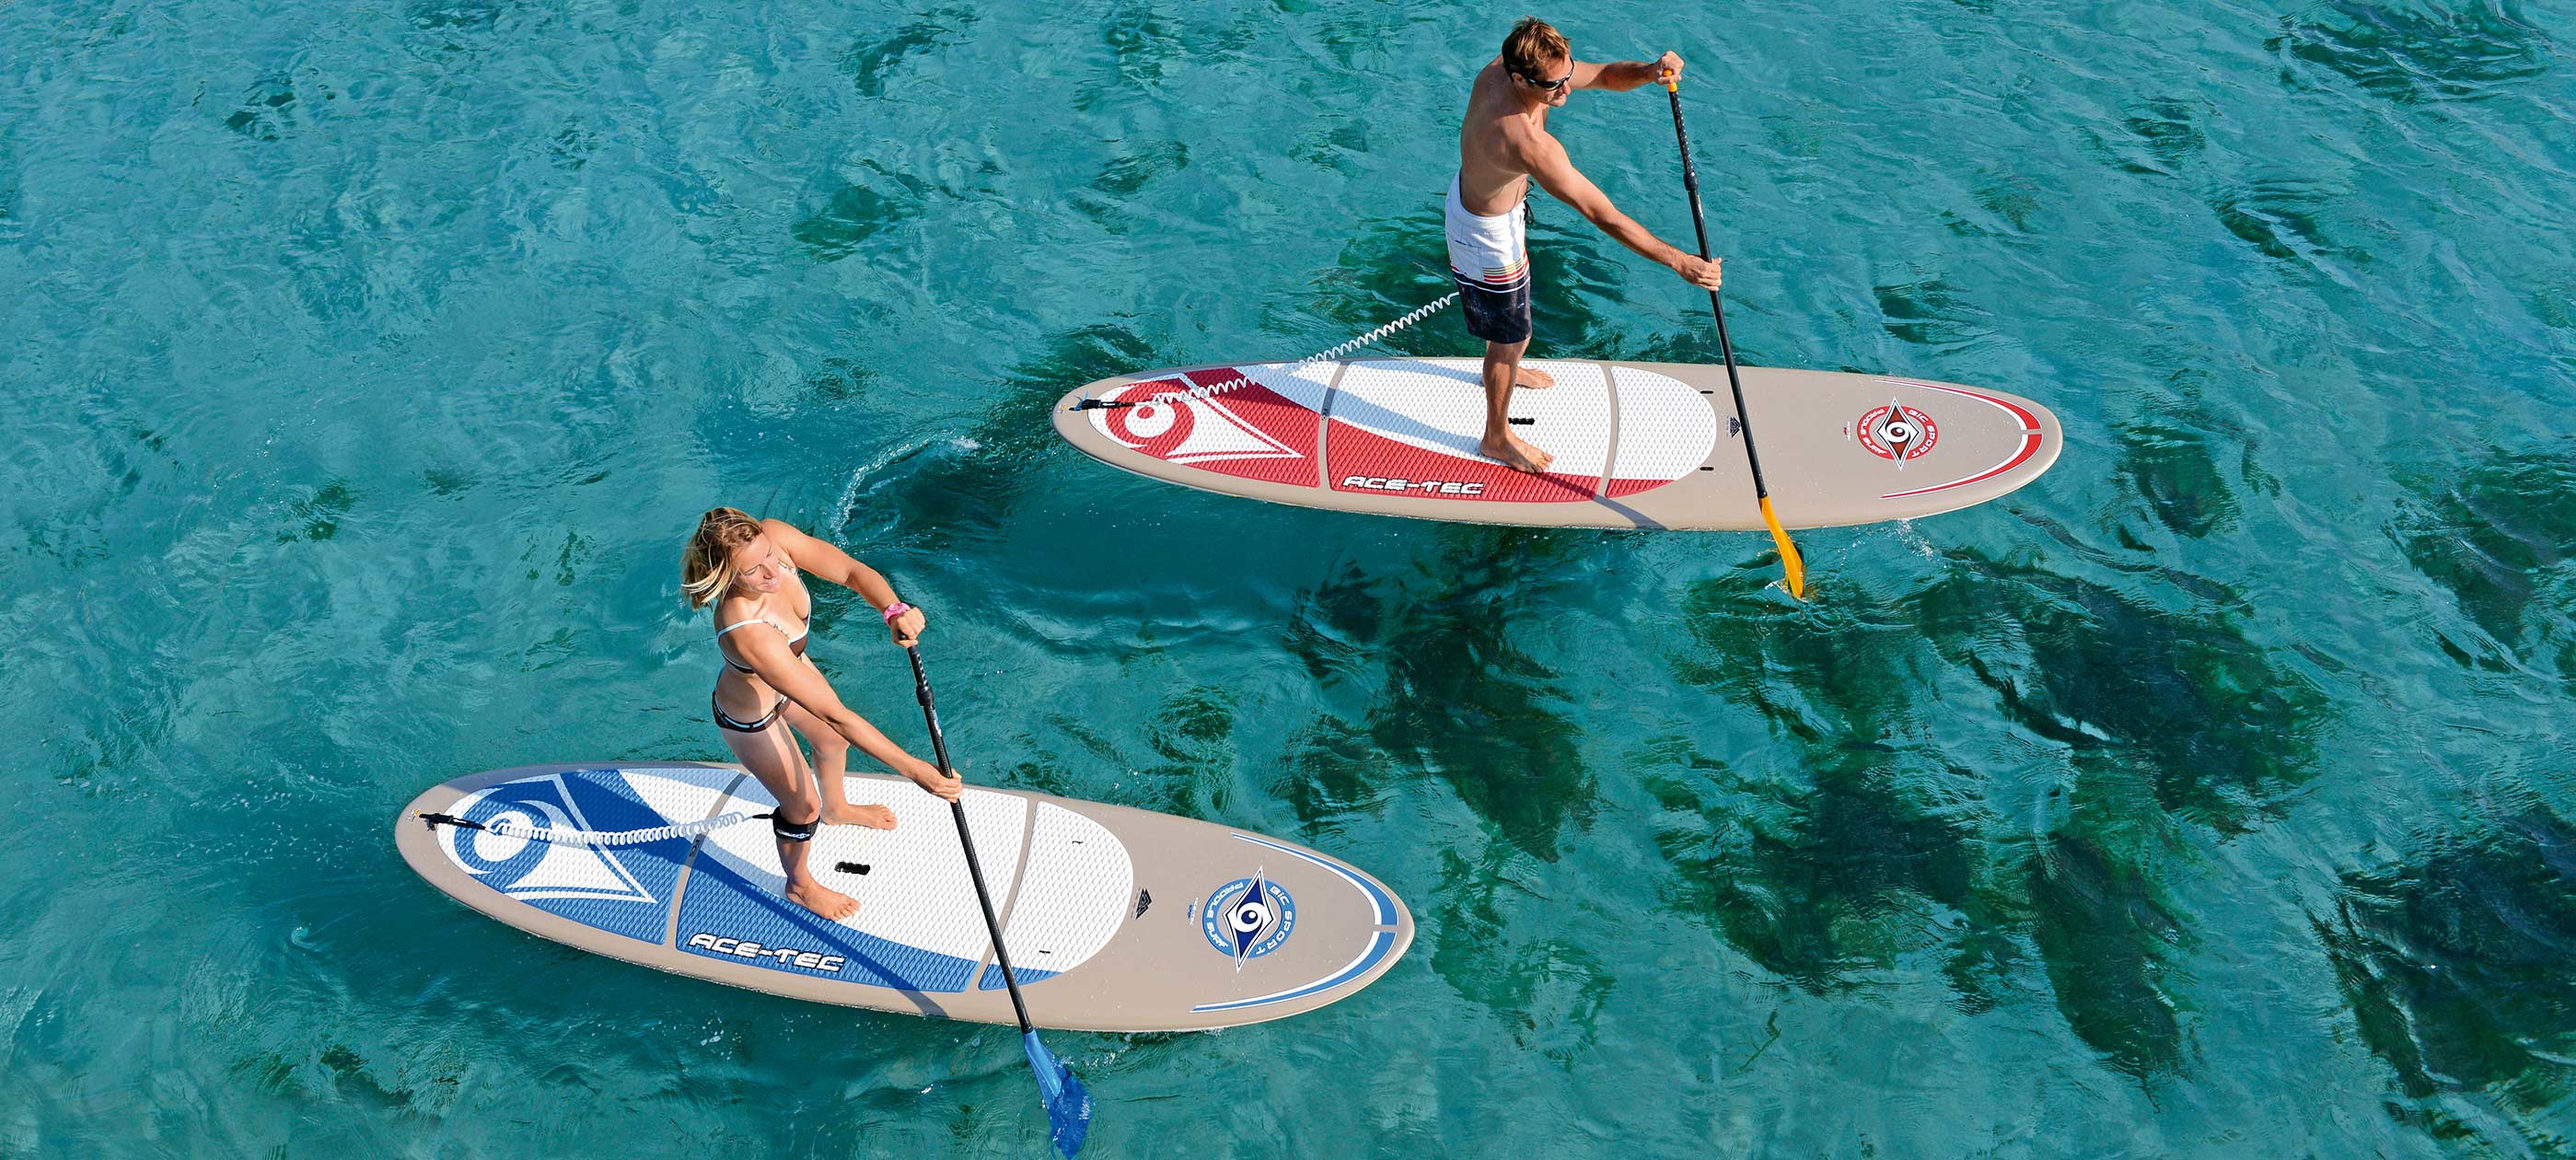 Cours de Stand-up Paddle